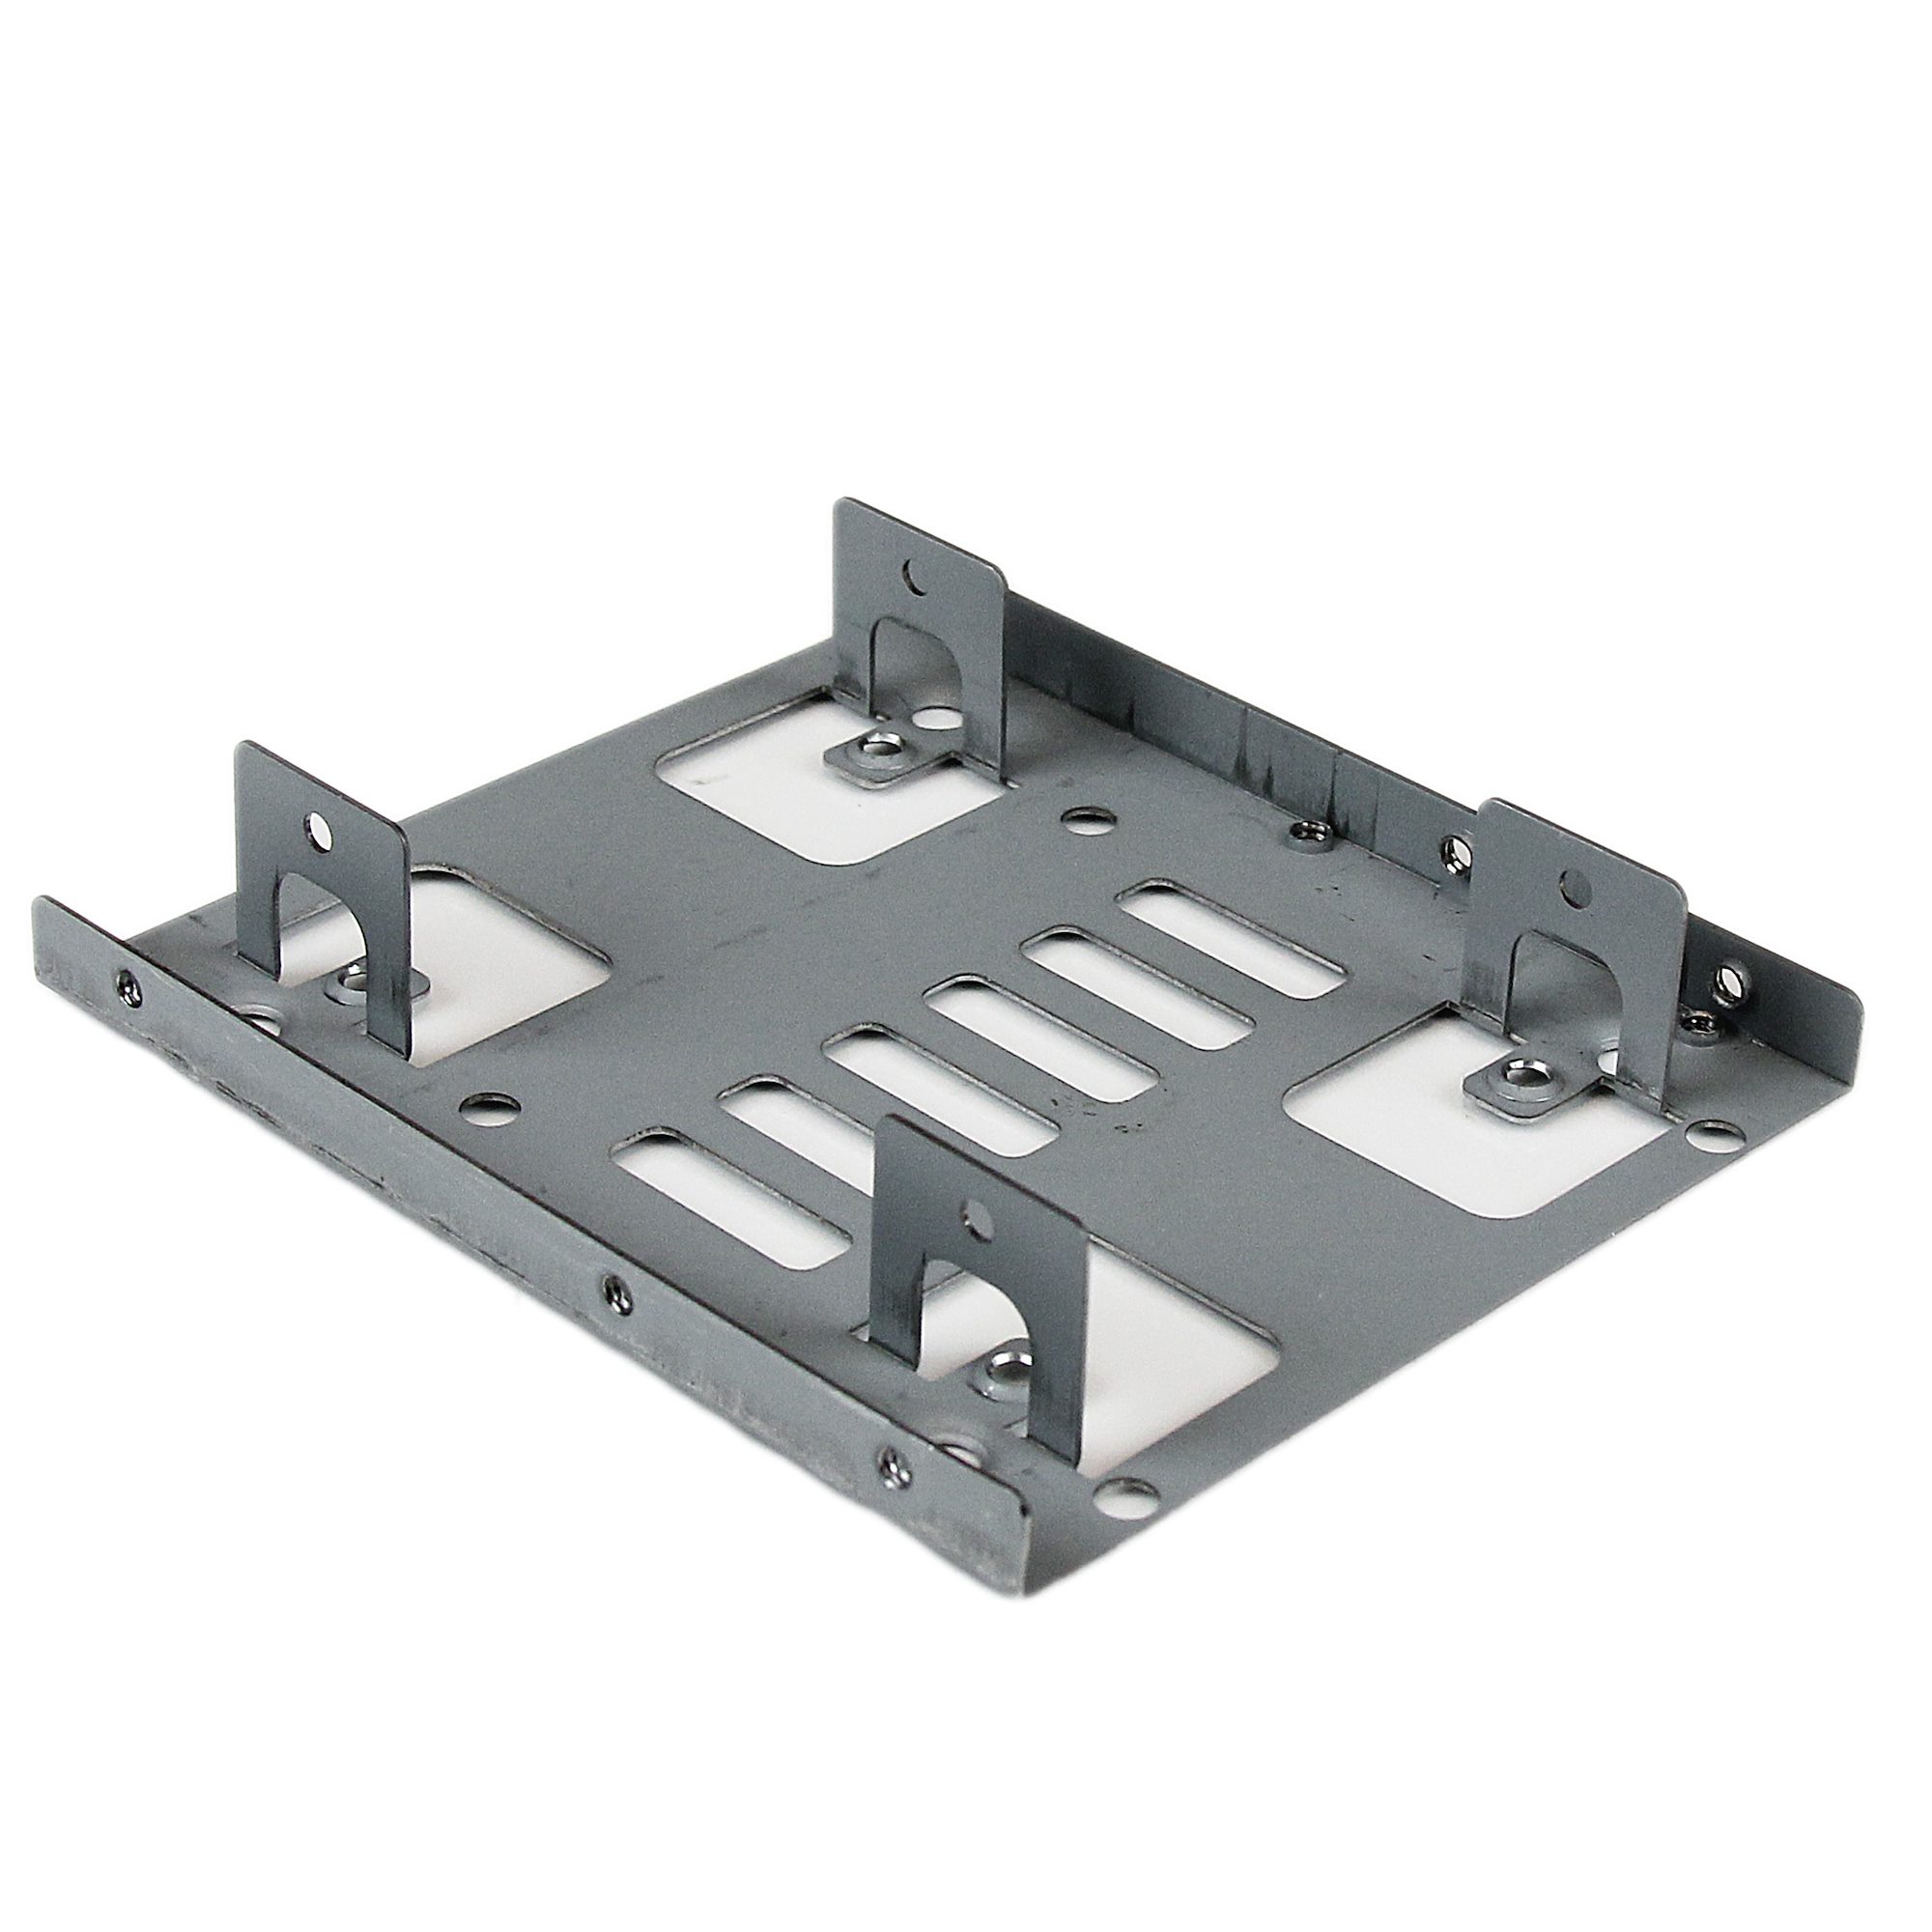 Dual 2.5” HDD to Mount Bracket - Drive Mounting & Accessories |